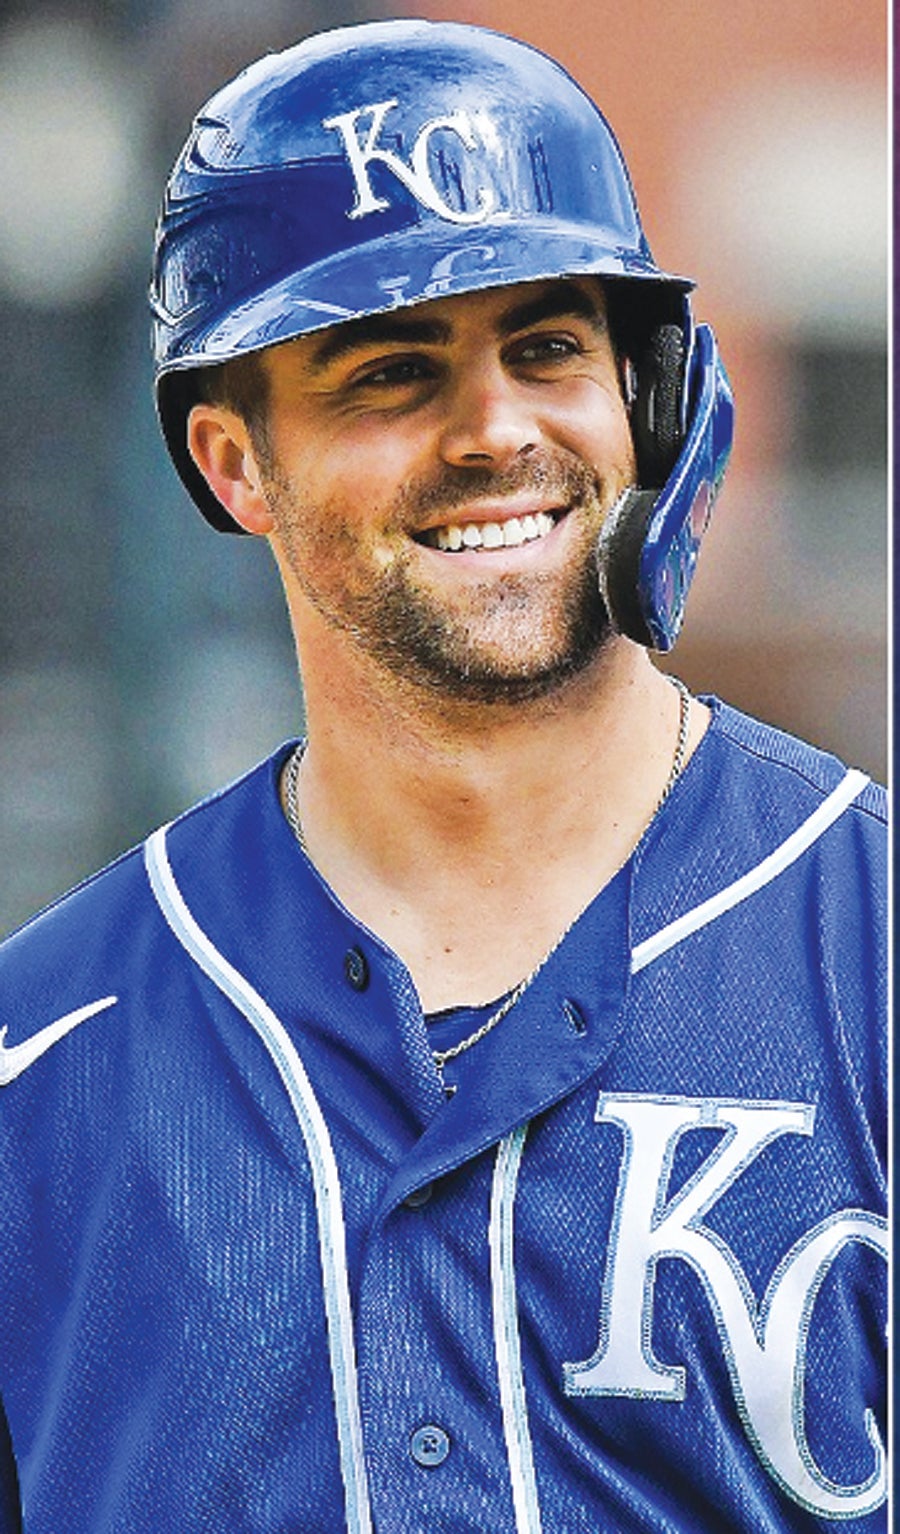 Whit Merrifield, a former Davie County High School star, signs extension  with Kansas City Royals